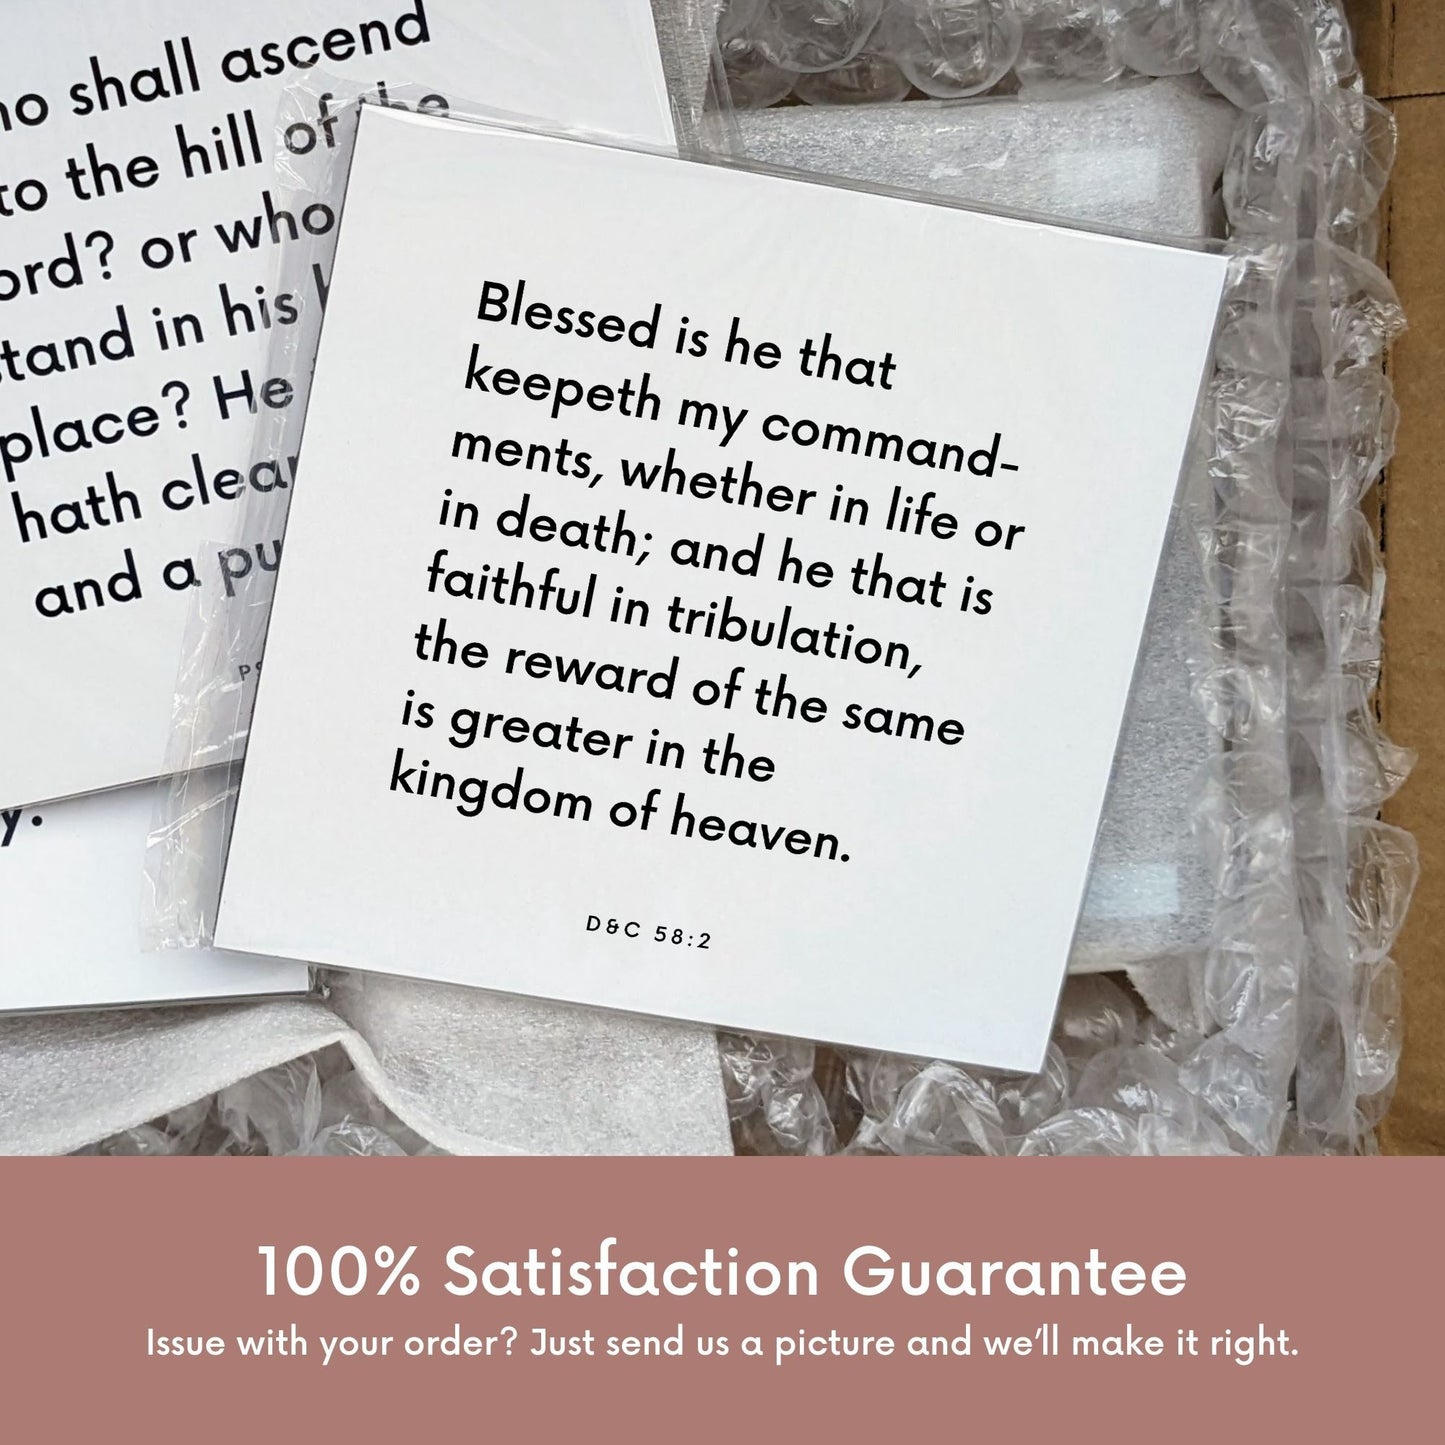 Shipping materials for scripture tile of D&C 58:2 - "He that is faithful in tribulation"